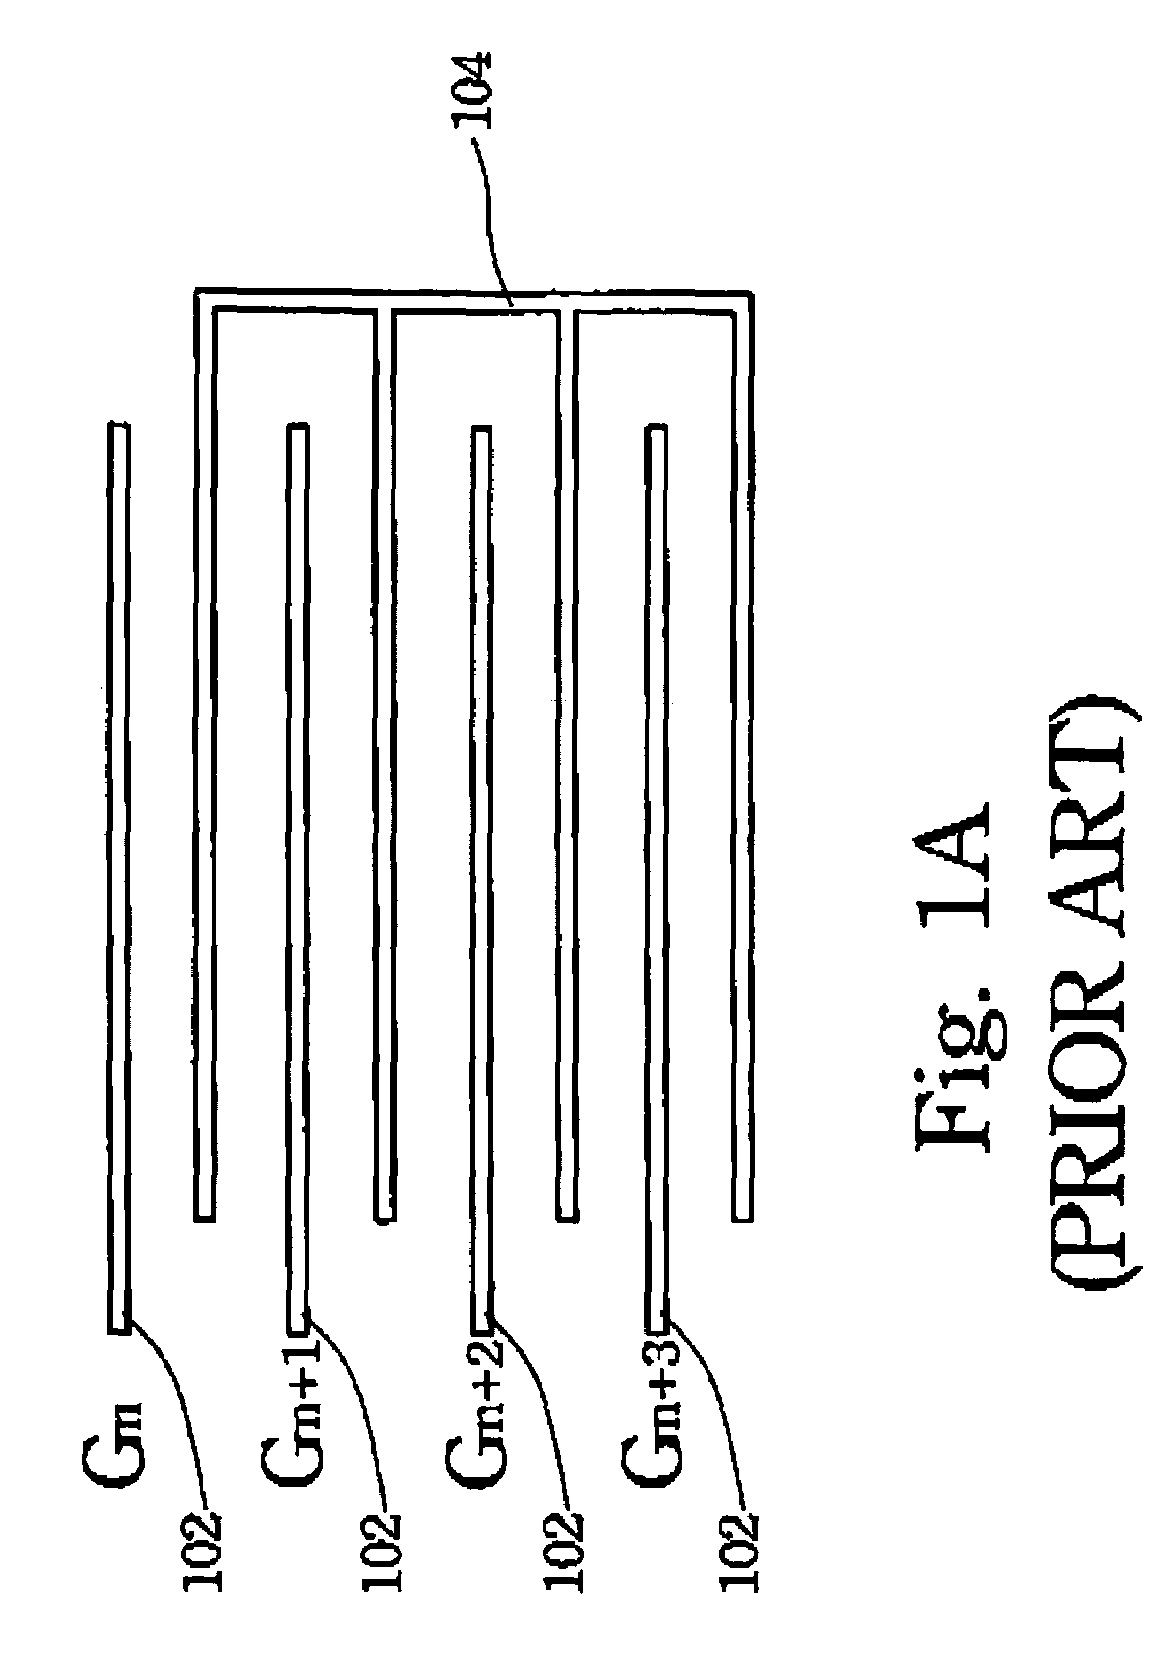 Control circuit for a common line